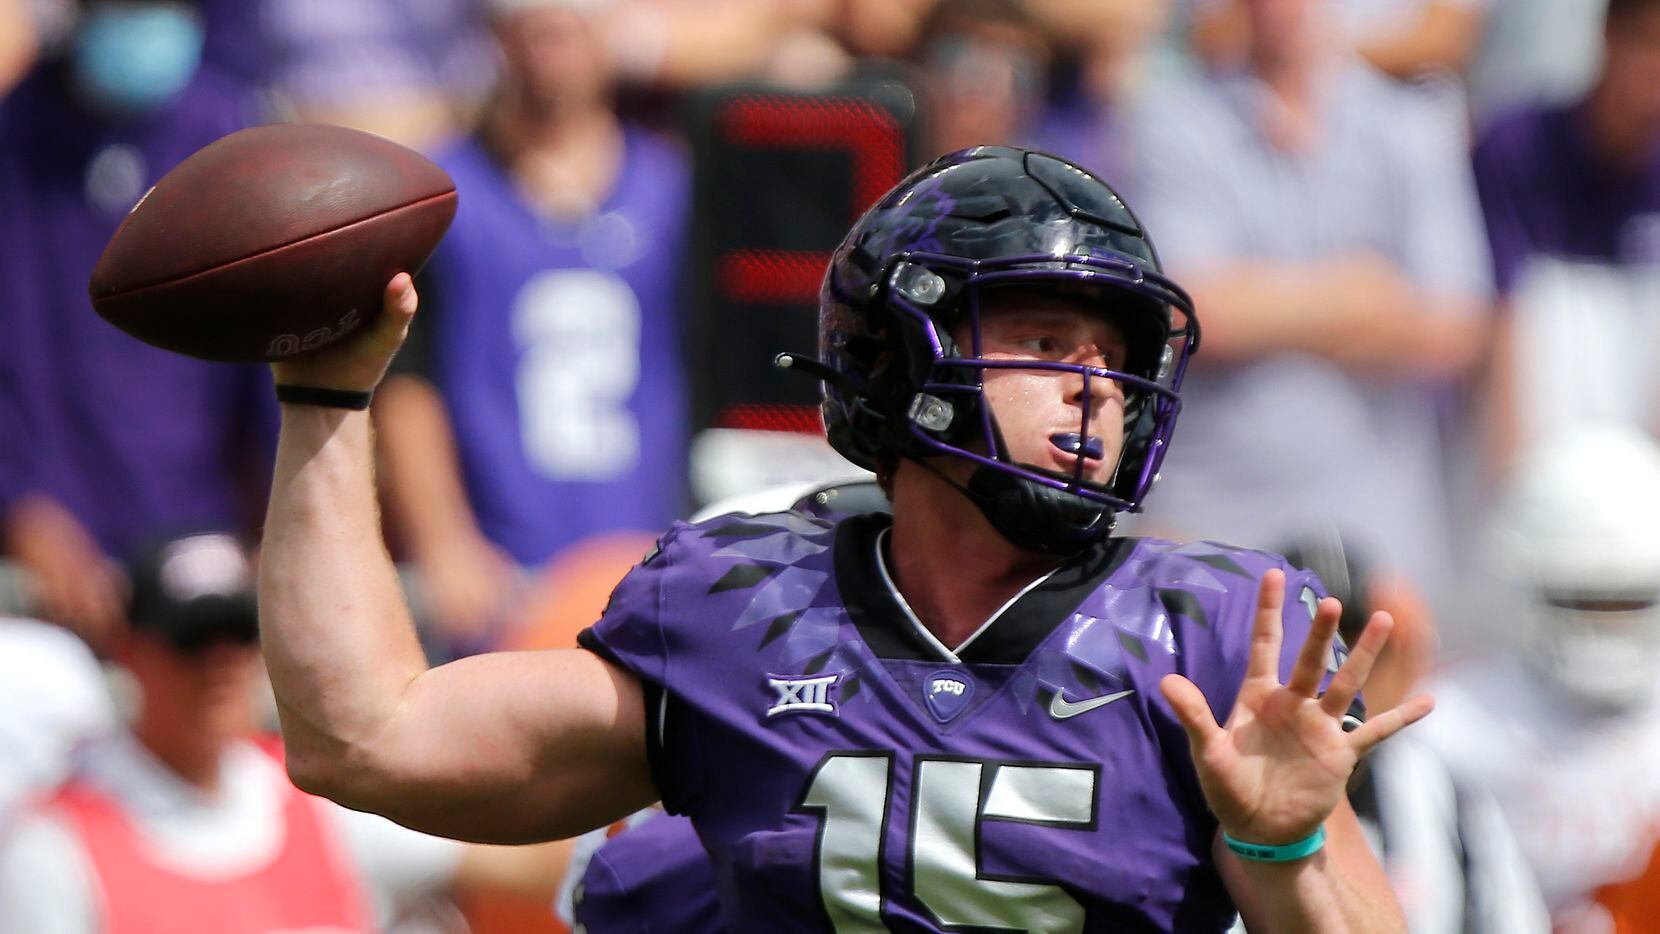 TCU’s Max Duggan, Chandler Morris go ‘back and forth’ in battle for